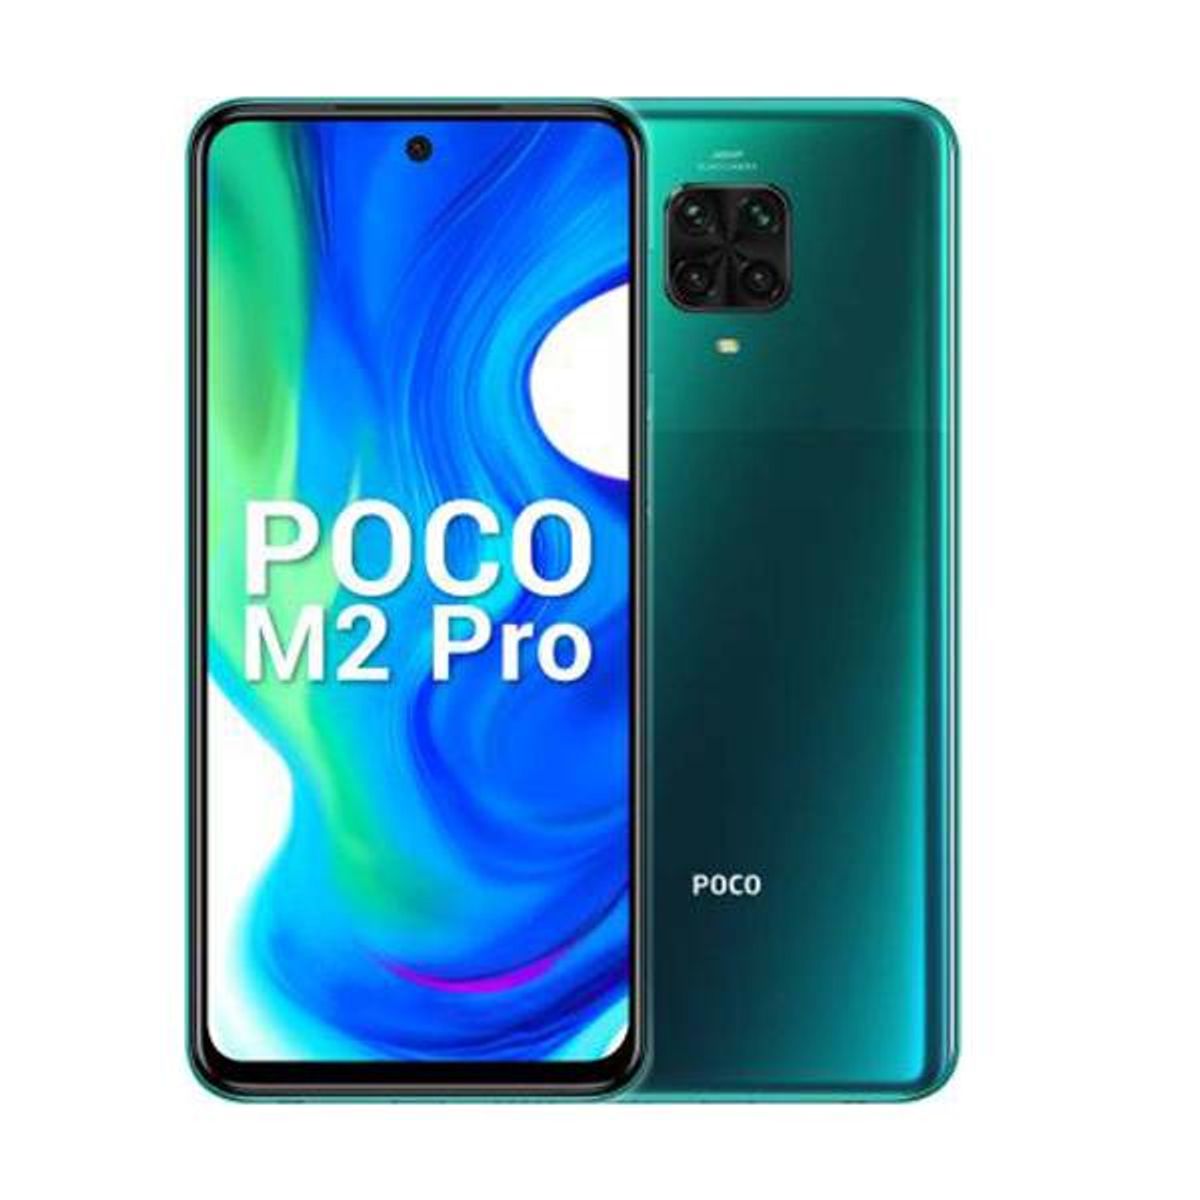 How to Hard Reset Poco M2 Mobile Phone?